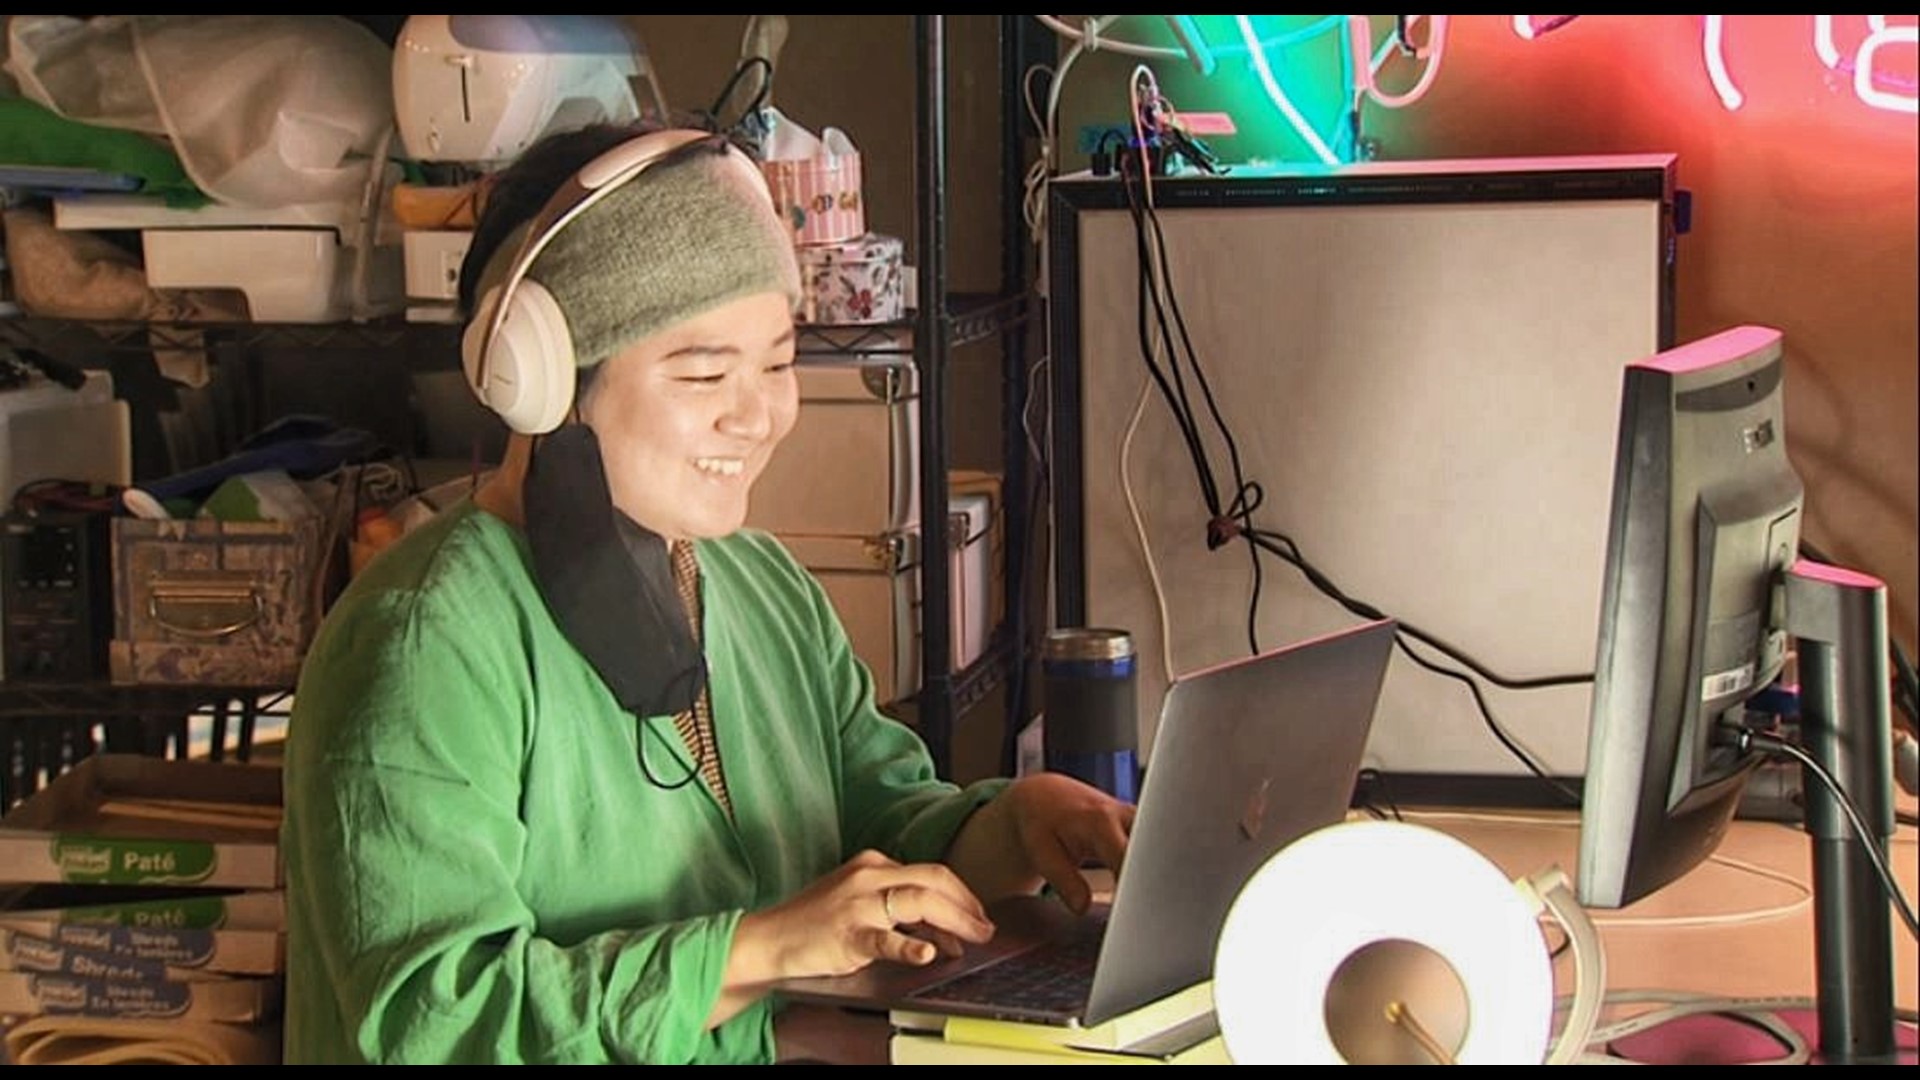 Chanhee Choi started work on her video game after being verbally attacked last year. #k5evening